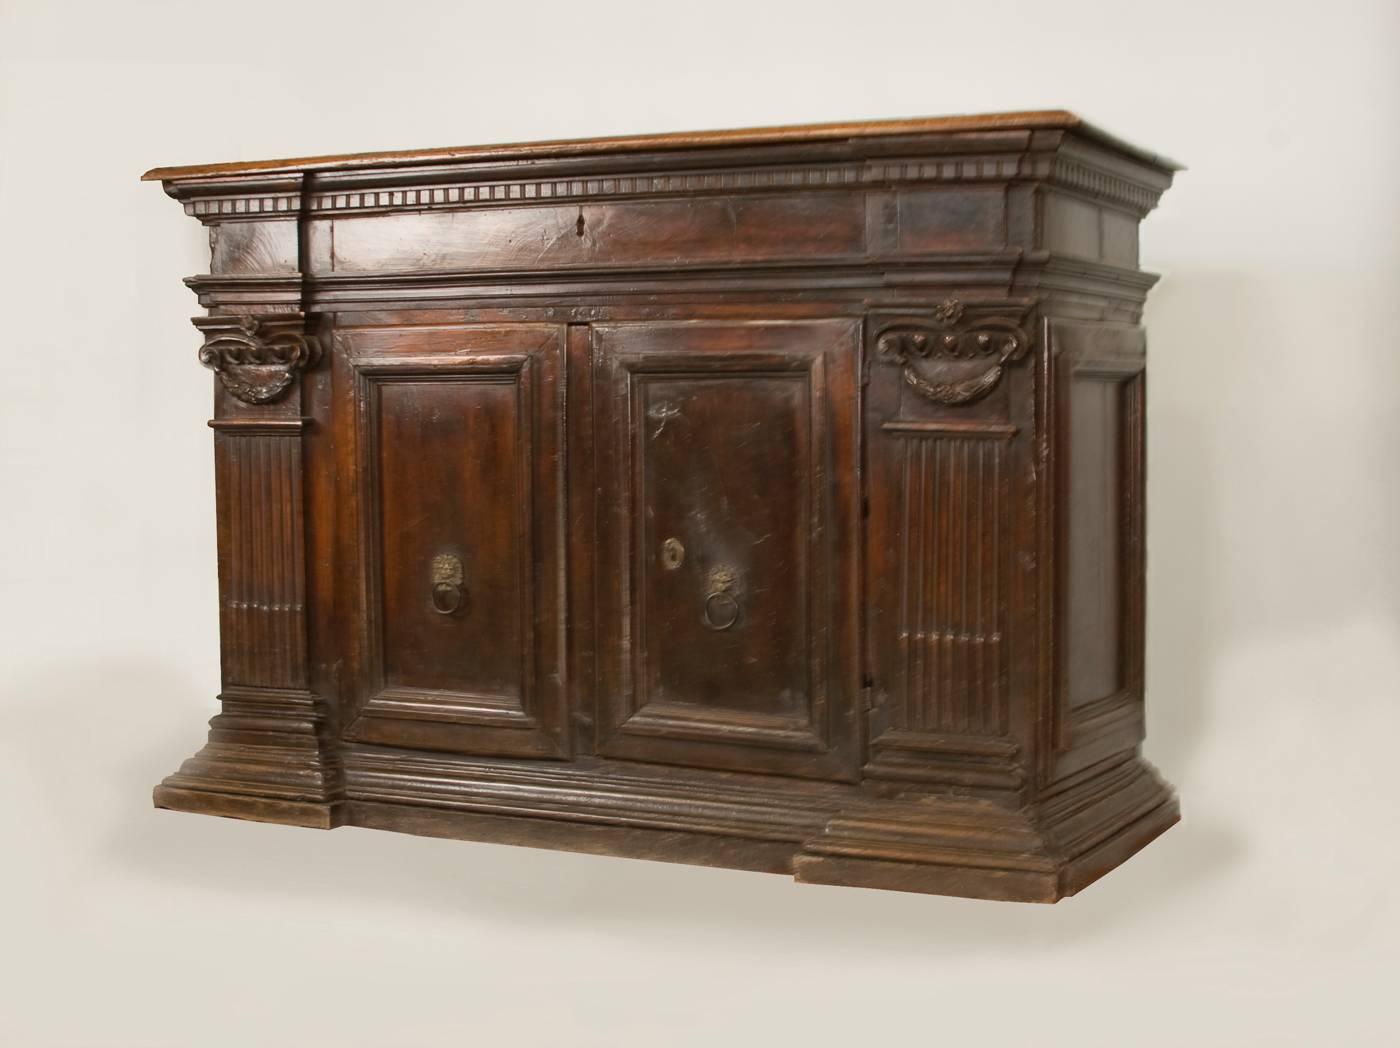 A wonderful  and rare walnut credenza or sideboard, heavy patinated, original
unrestored finish and original hardware. The hand-carved moldings and classic.
Ionic swags above fluted pilasters which rest on a heavy base molding are
typical for this